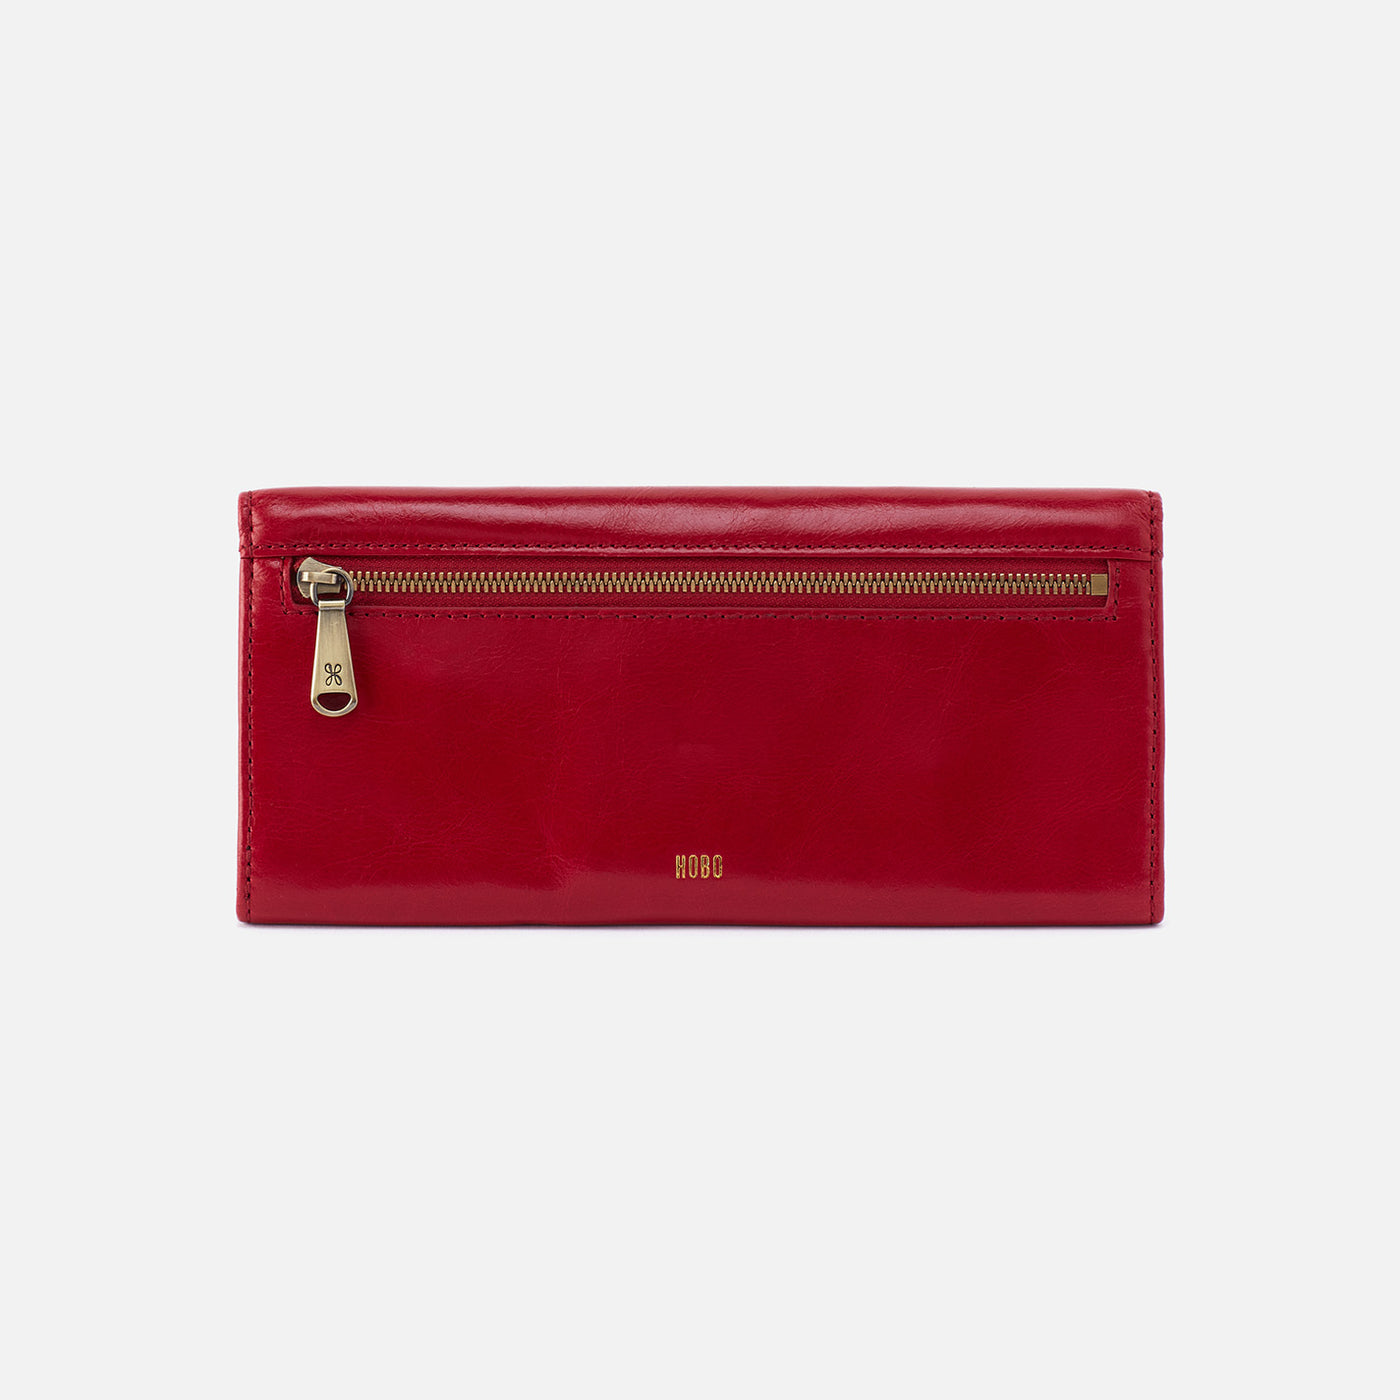 Jill Large Trifold Wallet in Polished Leather - Crimson